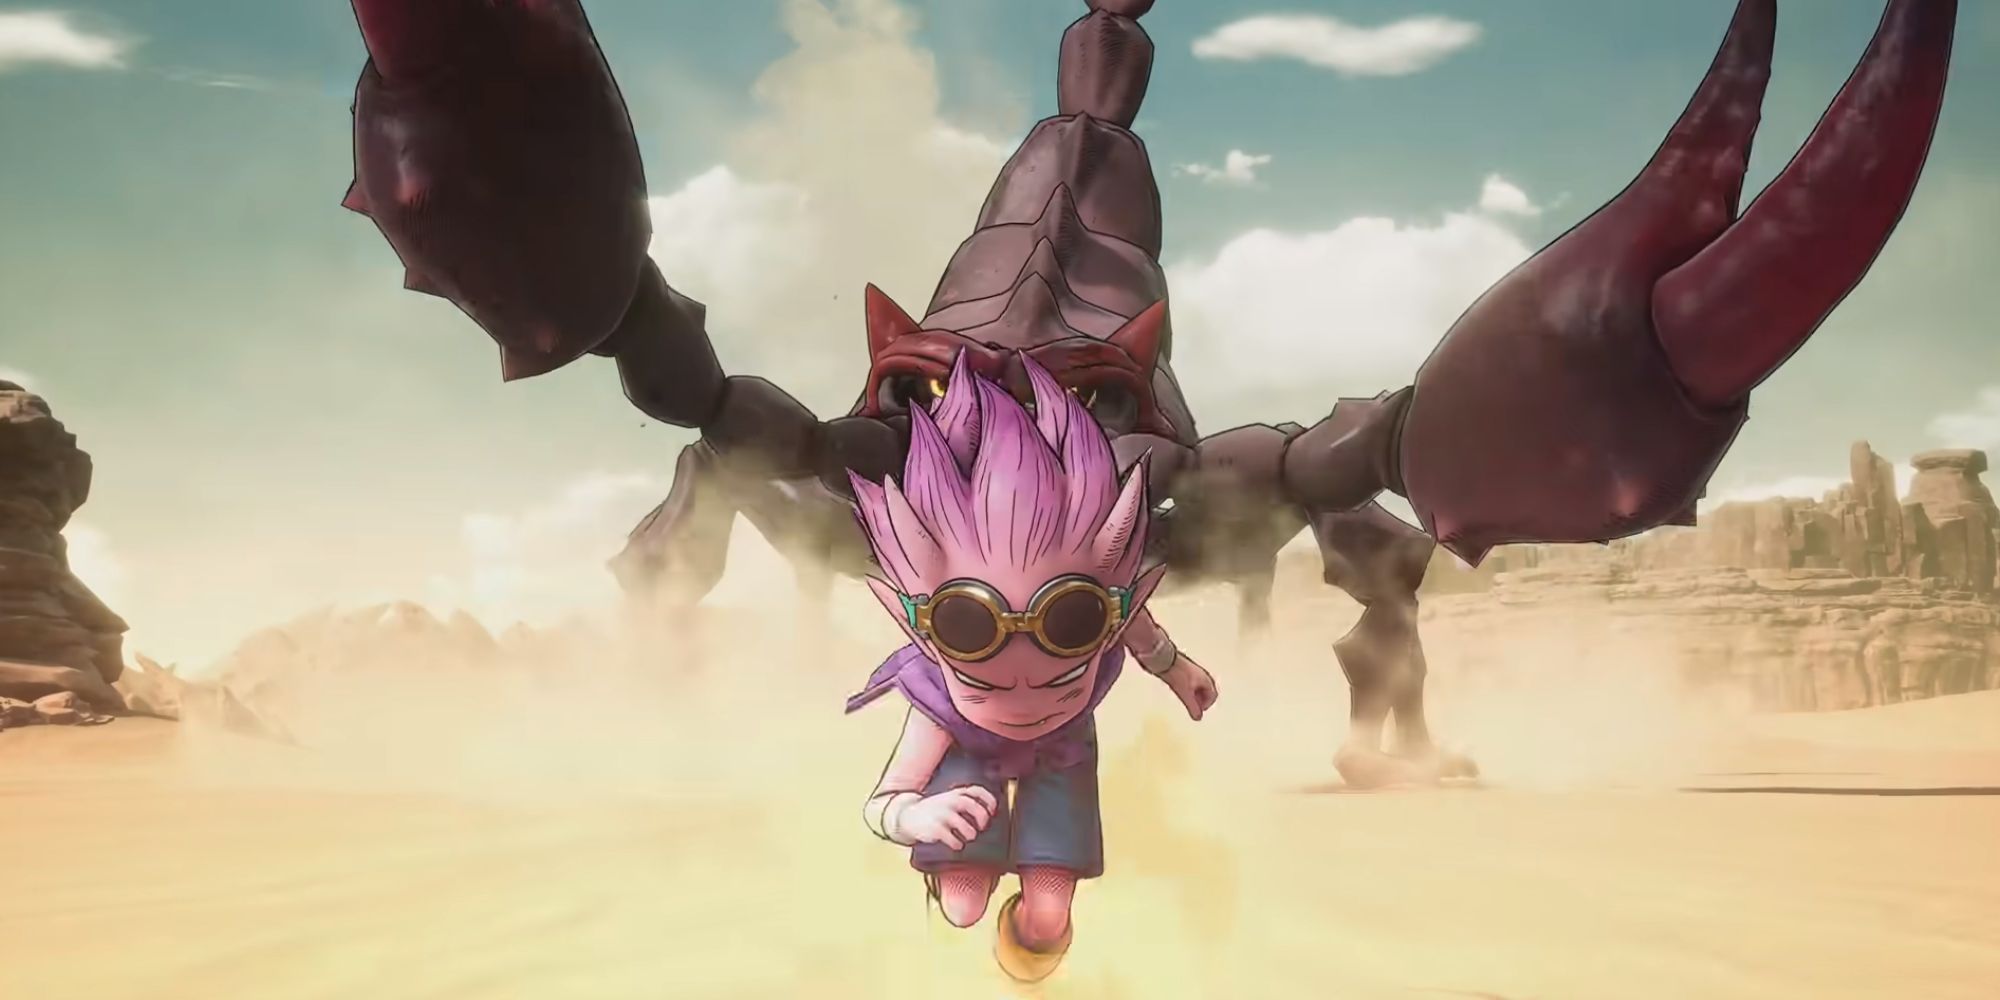 A screenshot from a recent Sand Land trailer, showing a character running away from a scorpion 